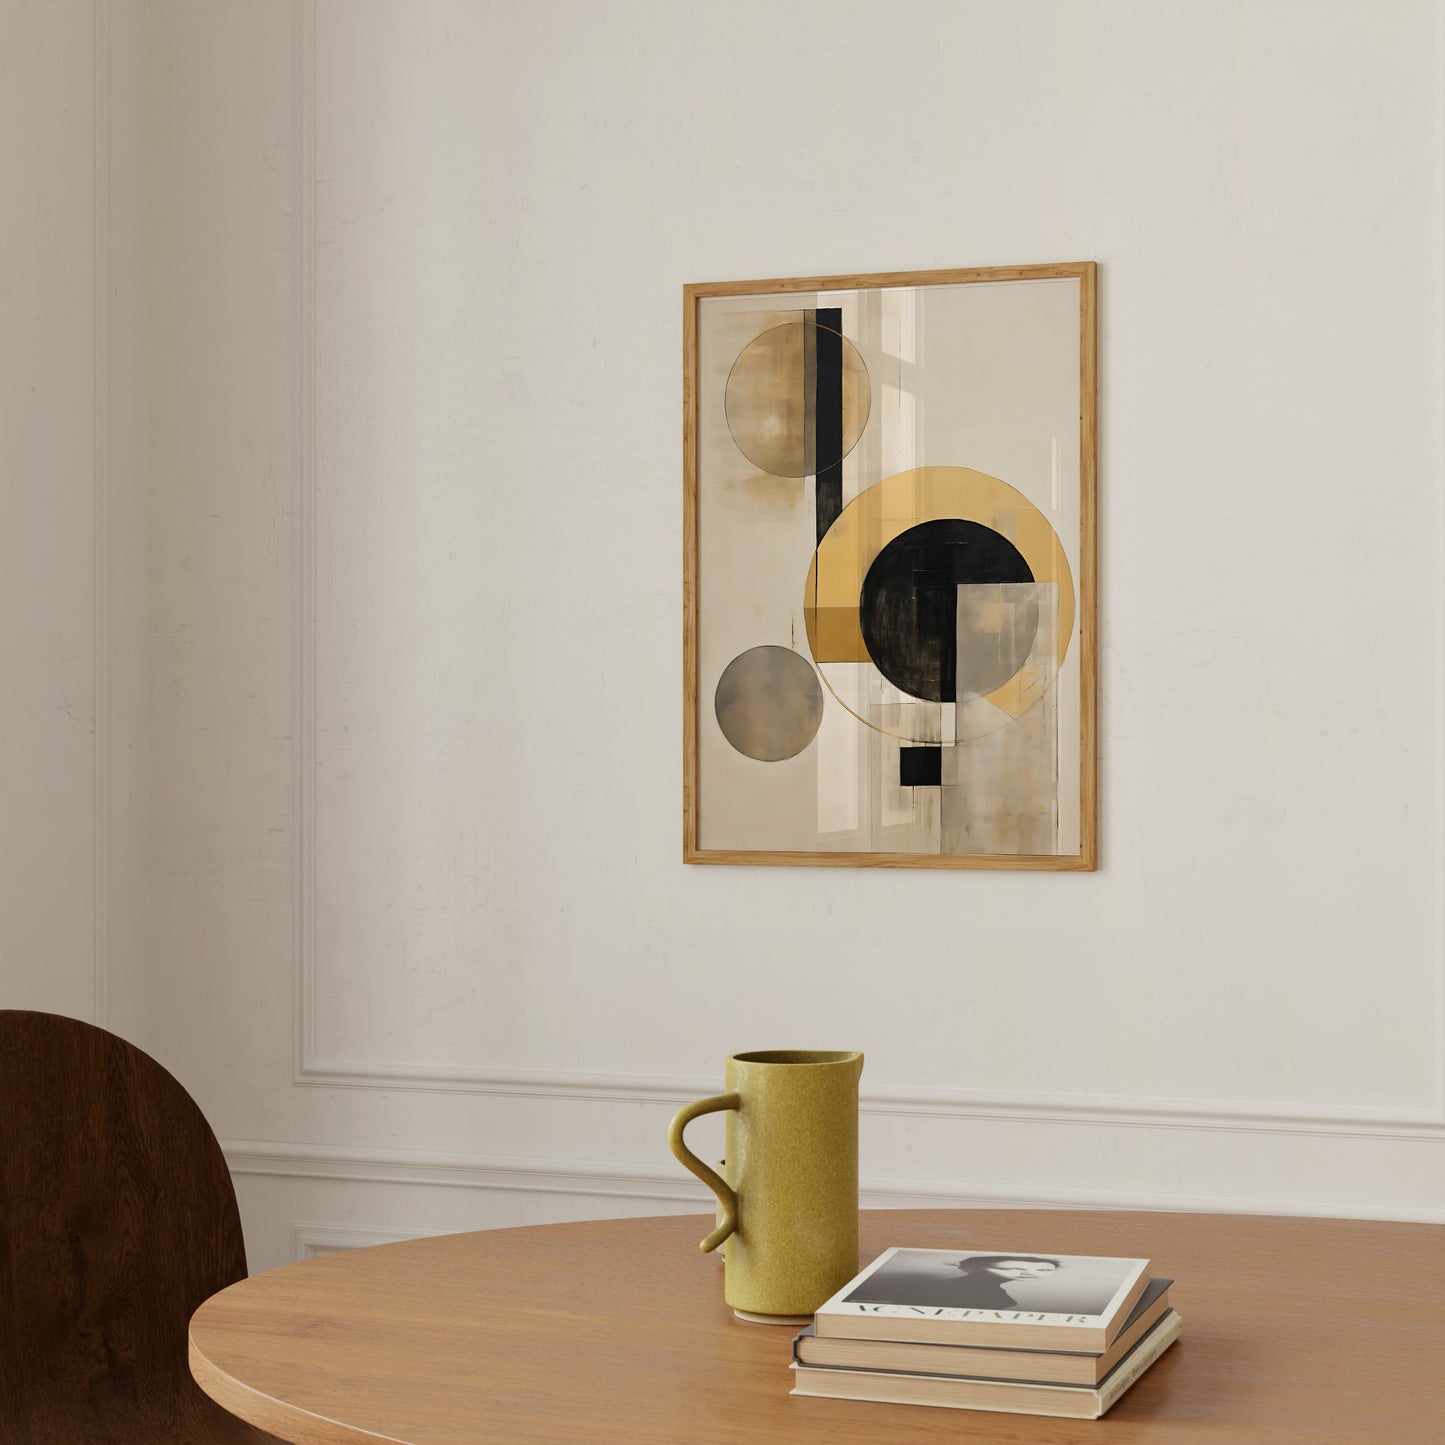 Modern abstract art on wall with a yellow mug and books on a wooden table.